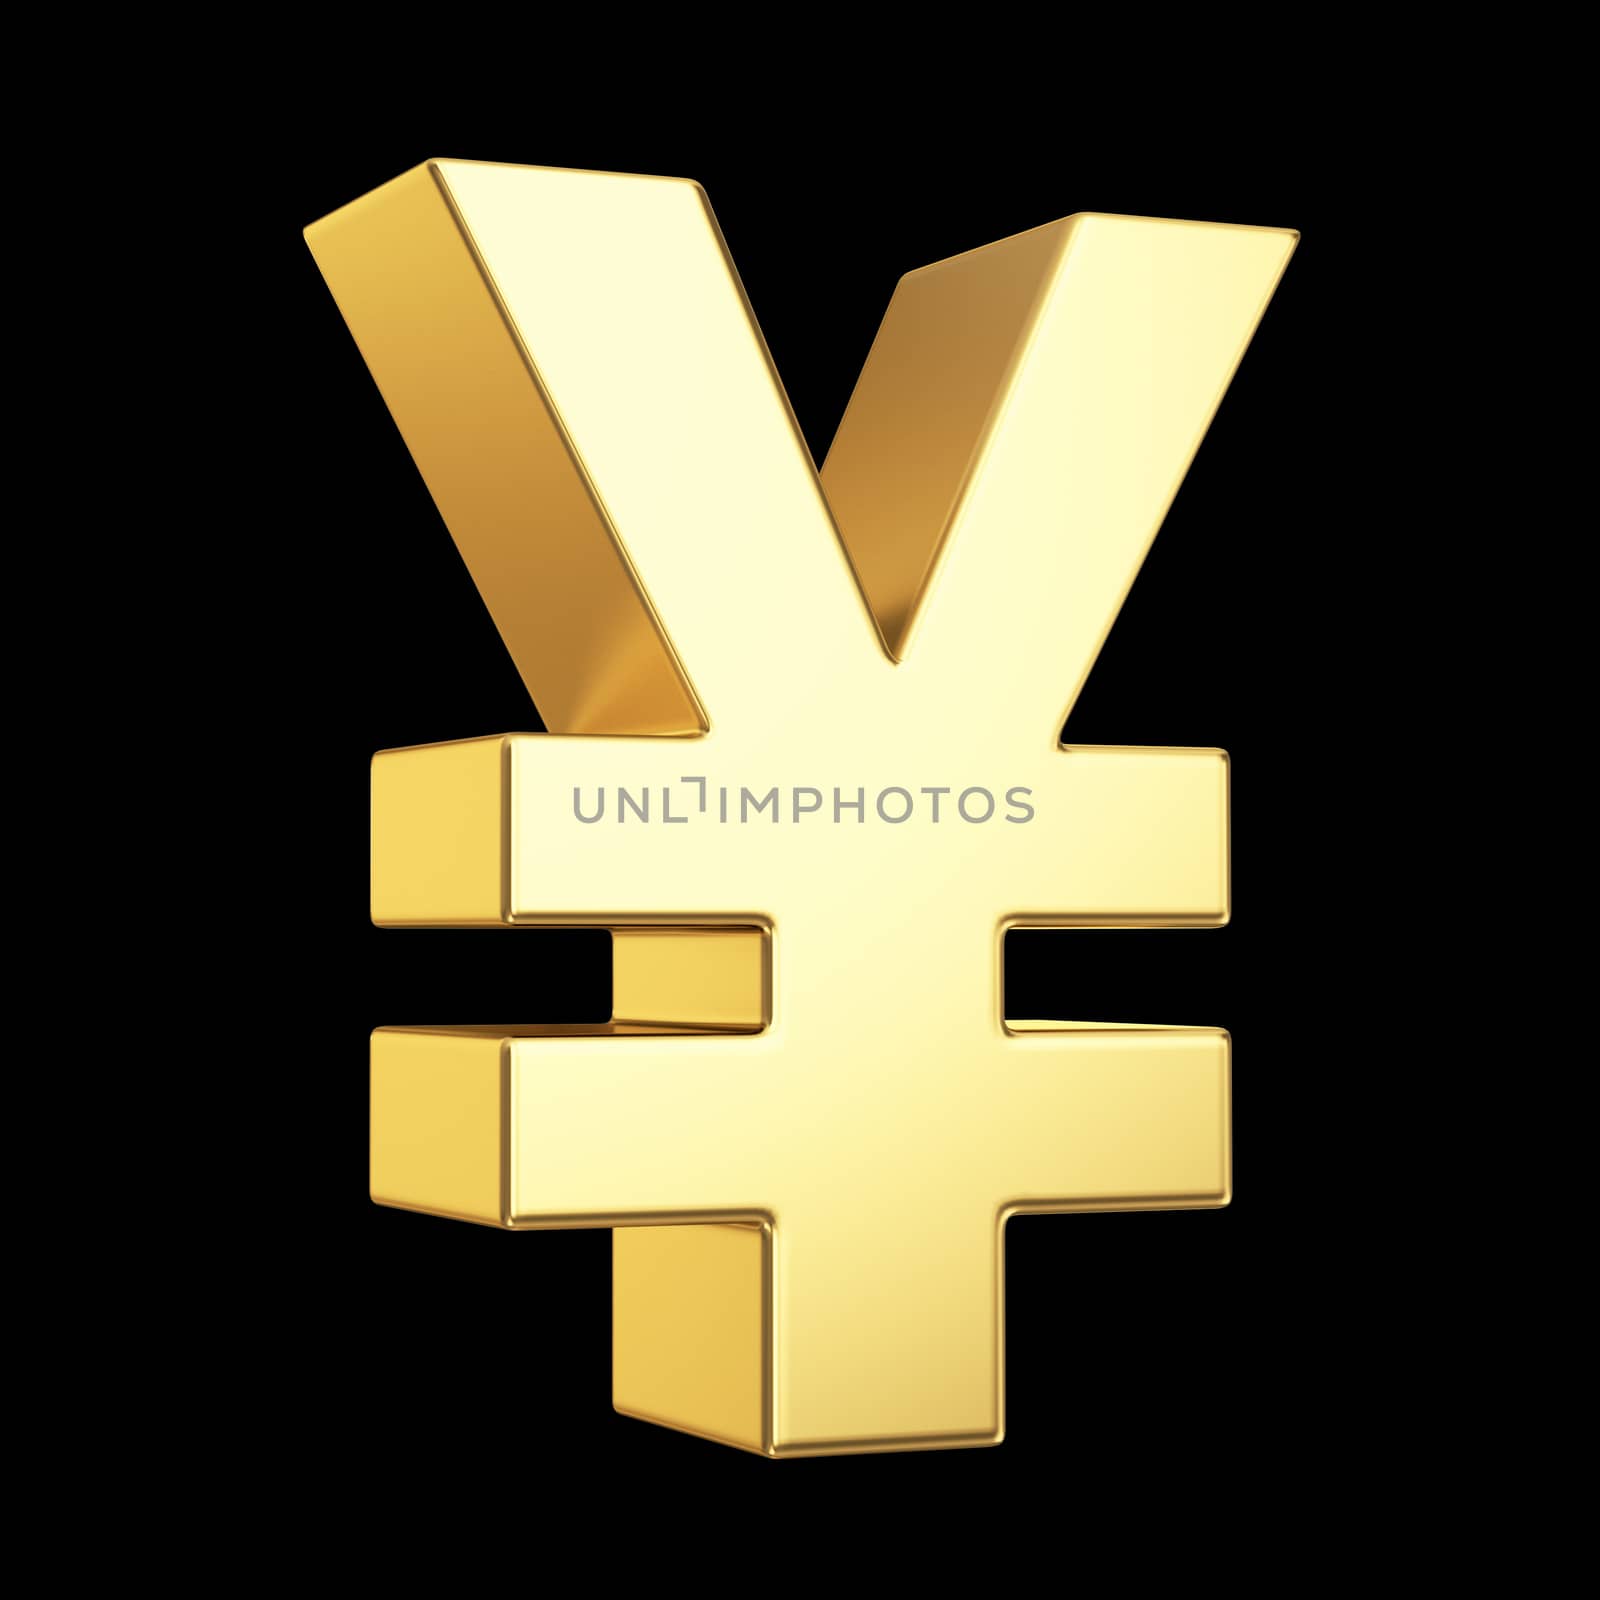 Golden currency symbol isolated on black with clipping path